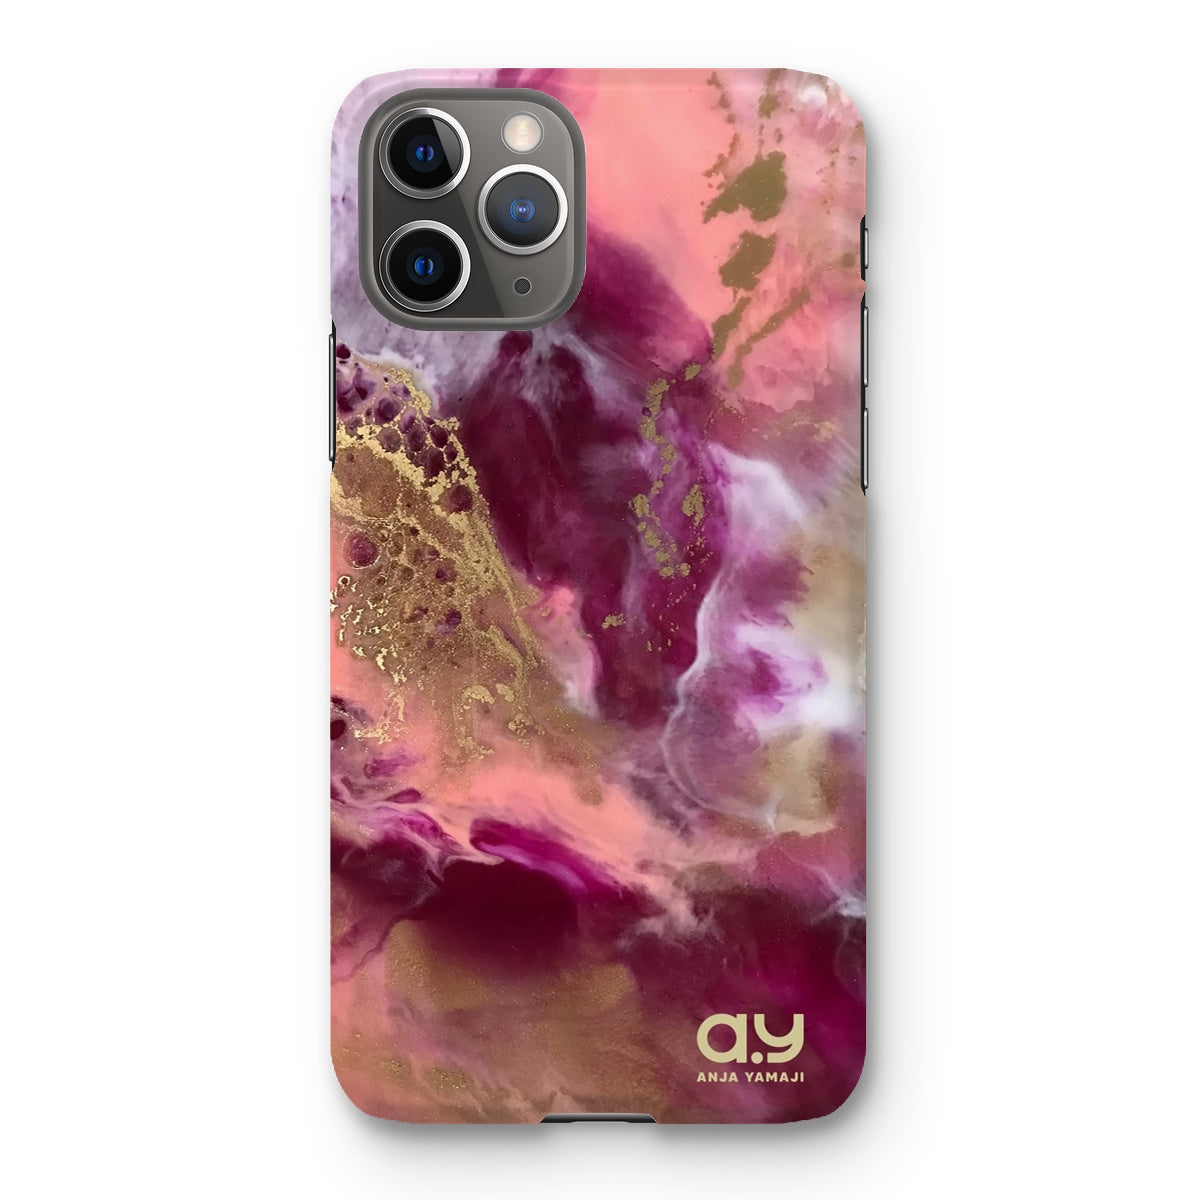 AETHER Phone Case